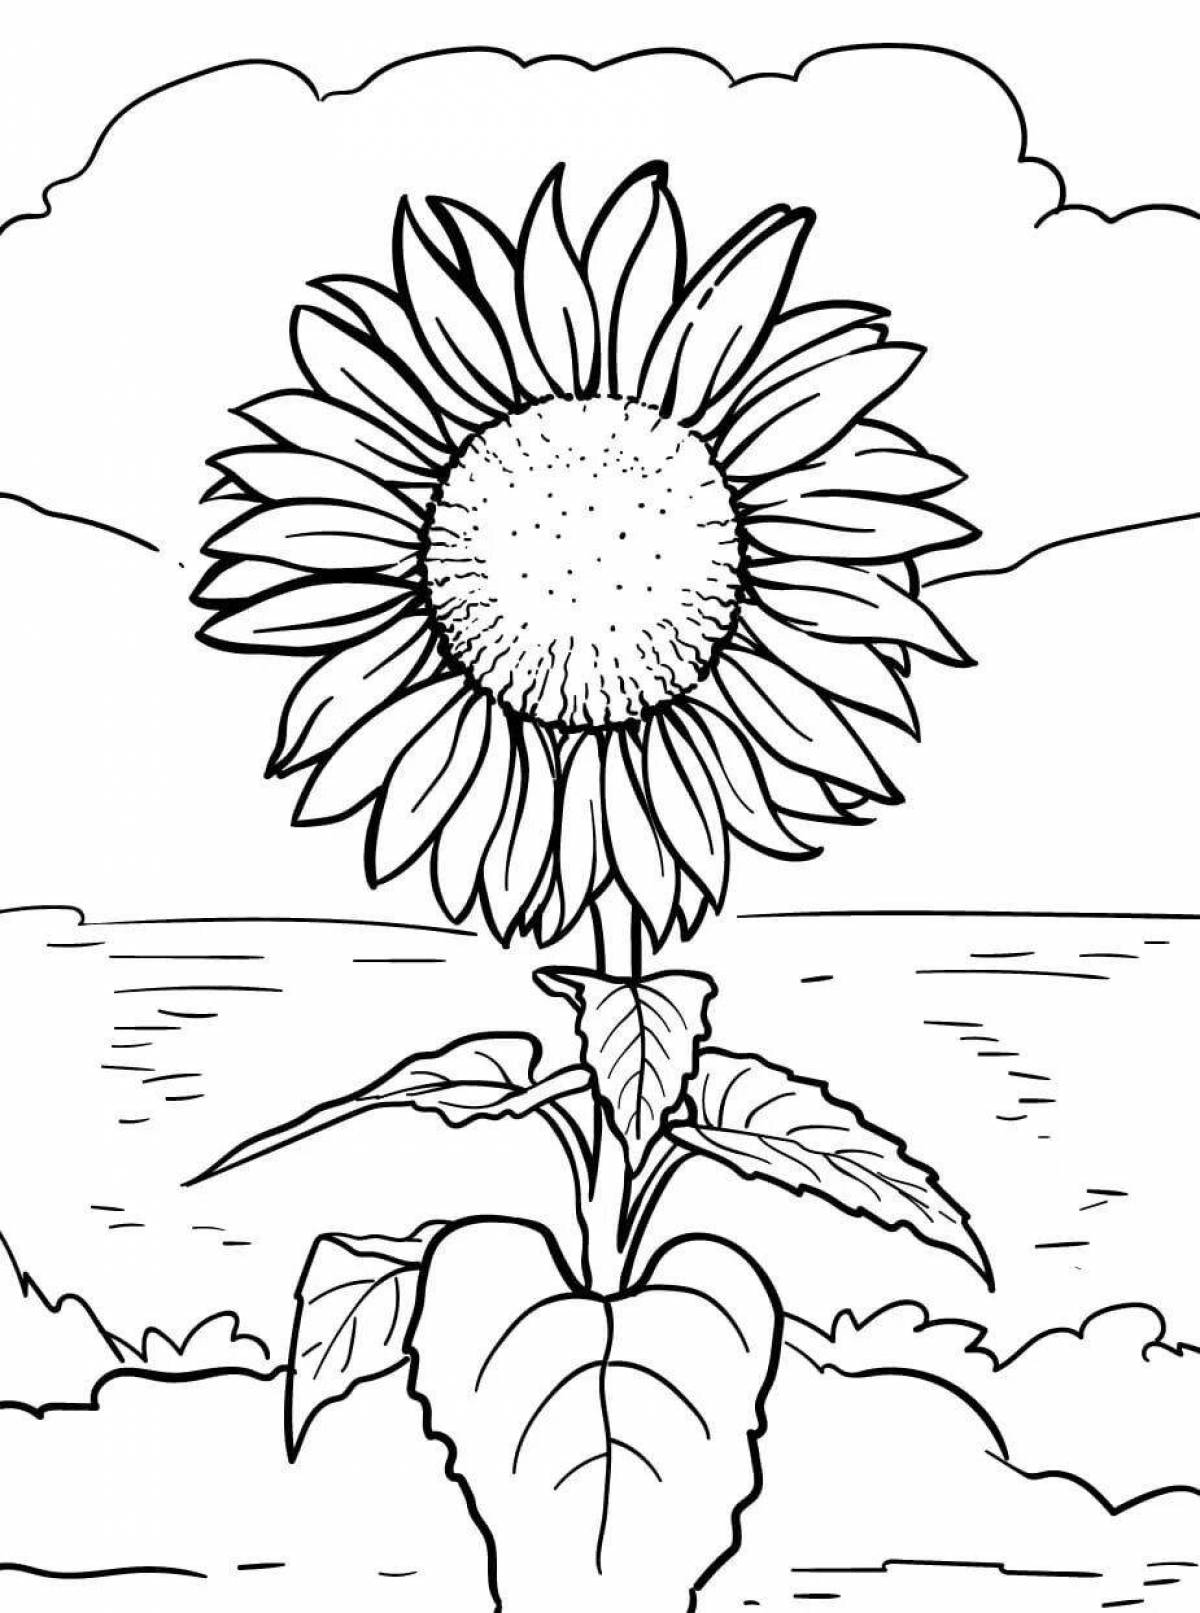 Sunflower playful coloring book for 2-3 year olds